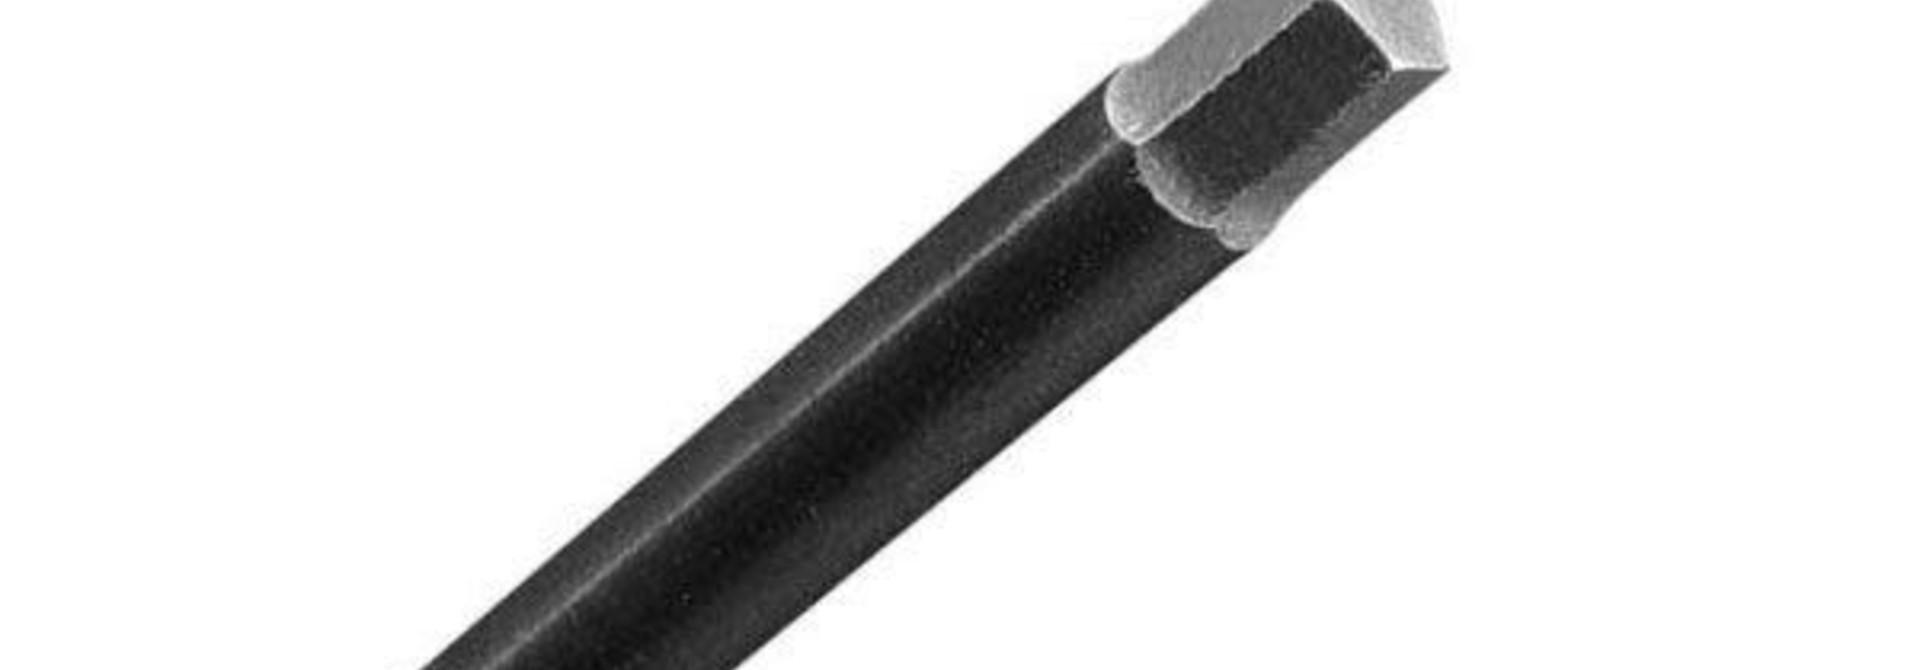 Replacement Tip .093 X 60 mm (3:32). H129321